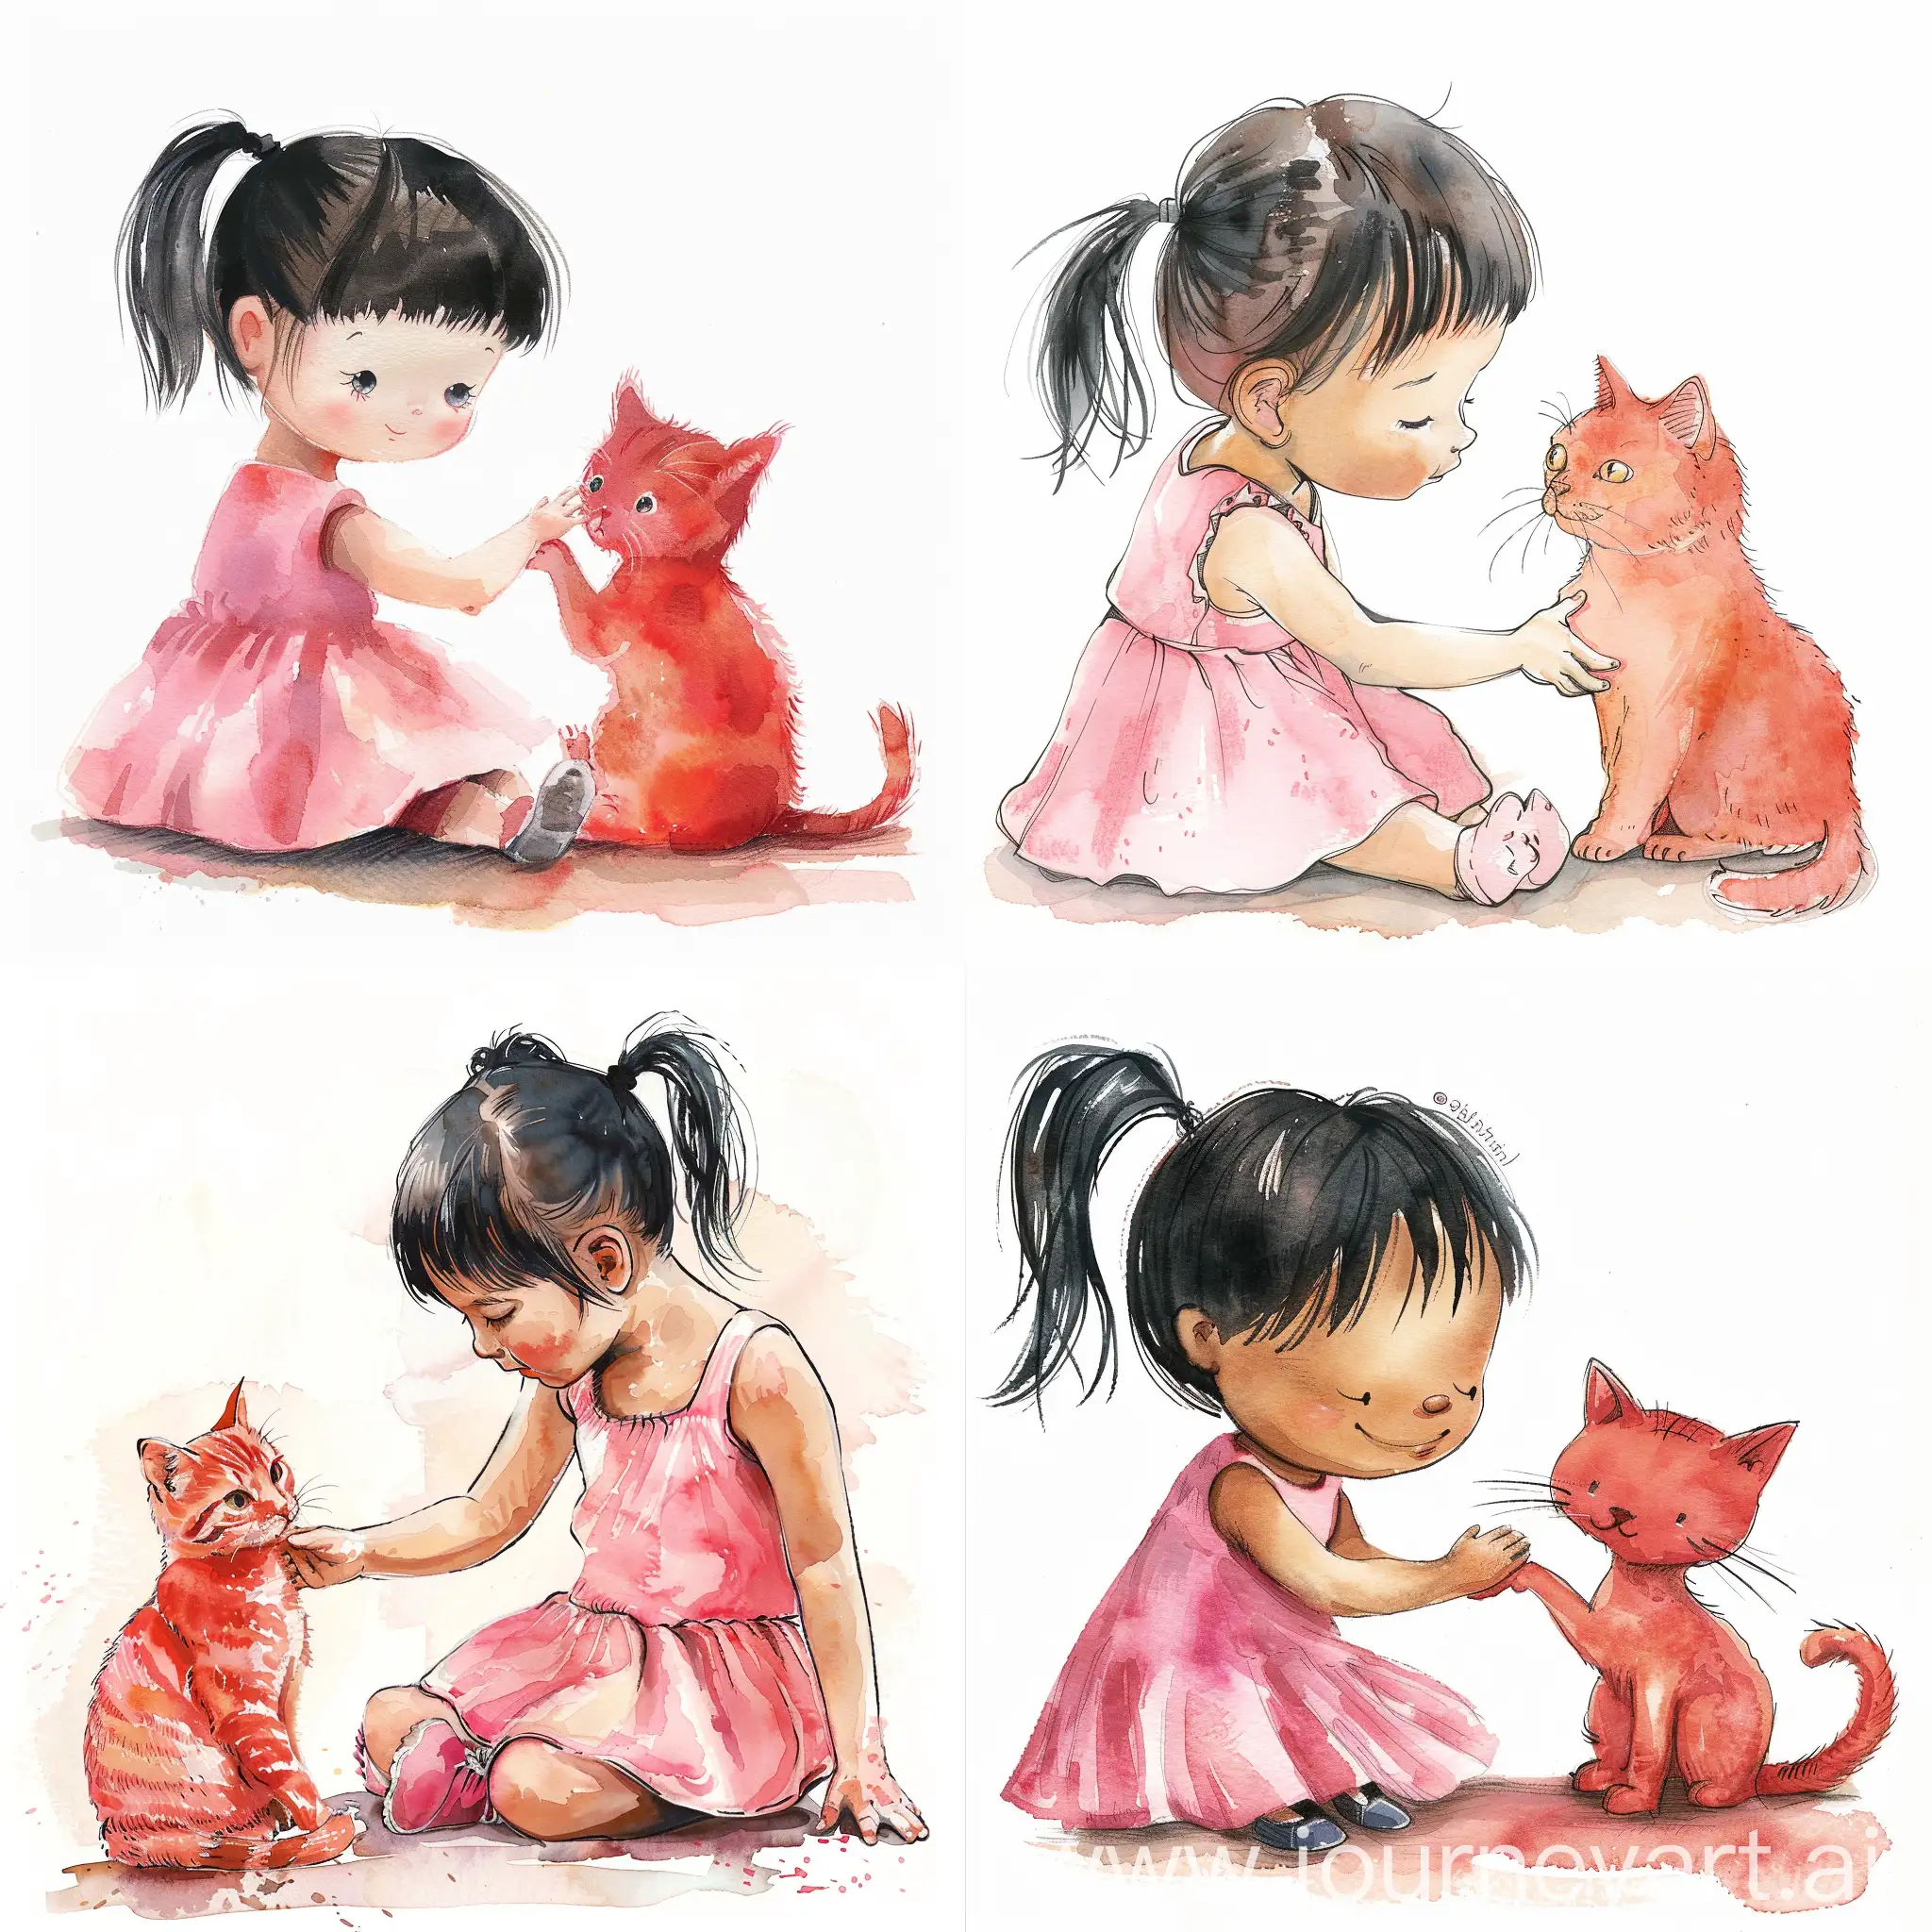 a little girl with black pigtails in a pink dress sat down and stroked a red cat, in high quality watercolor style